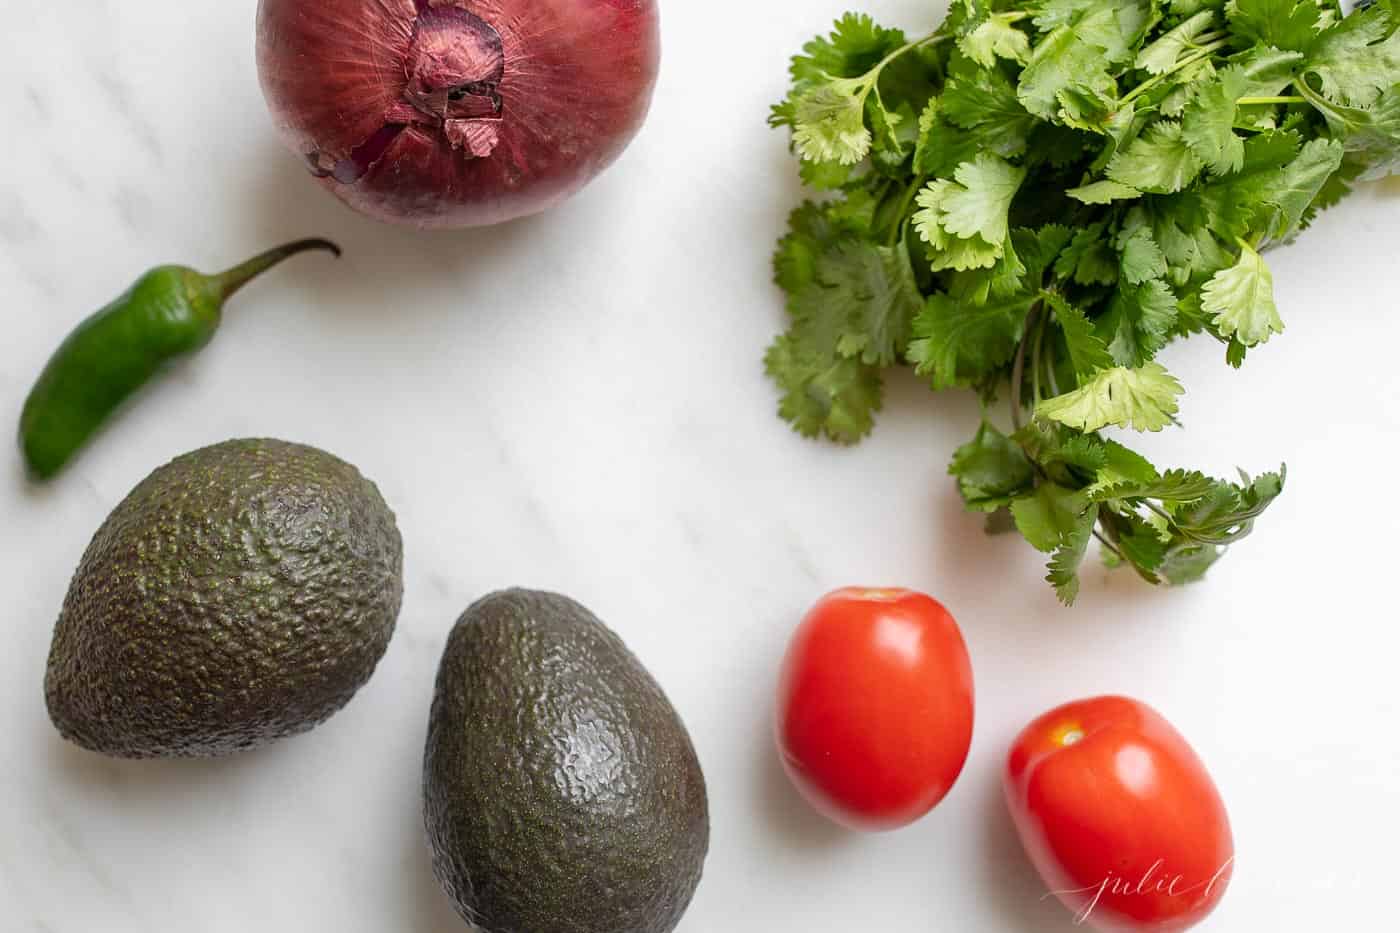 A white surface filled with the fresh ingredients for a guacamole recipe.